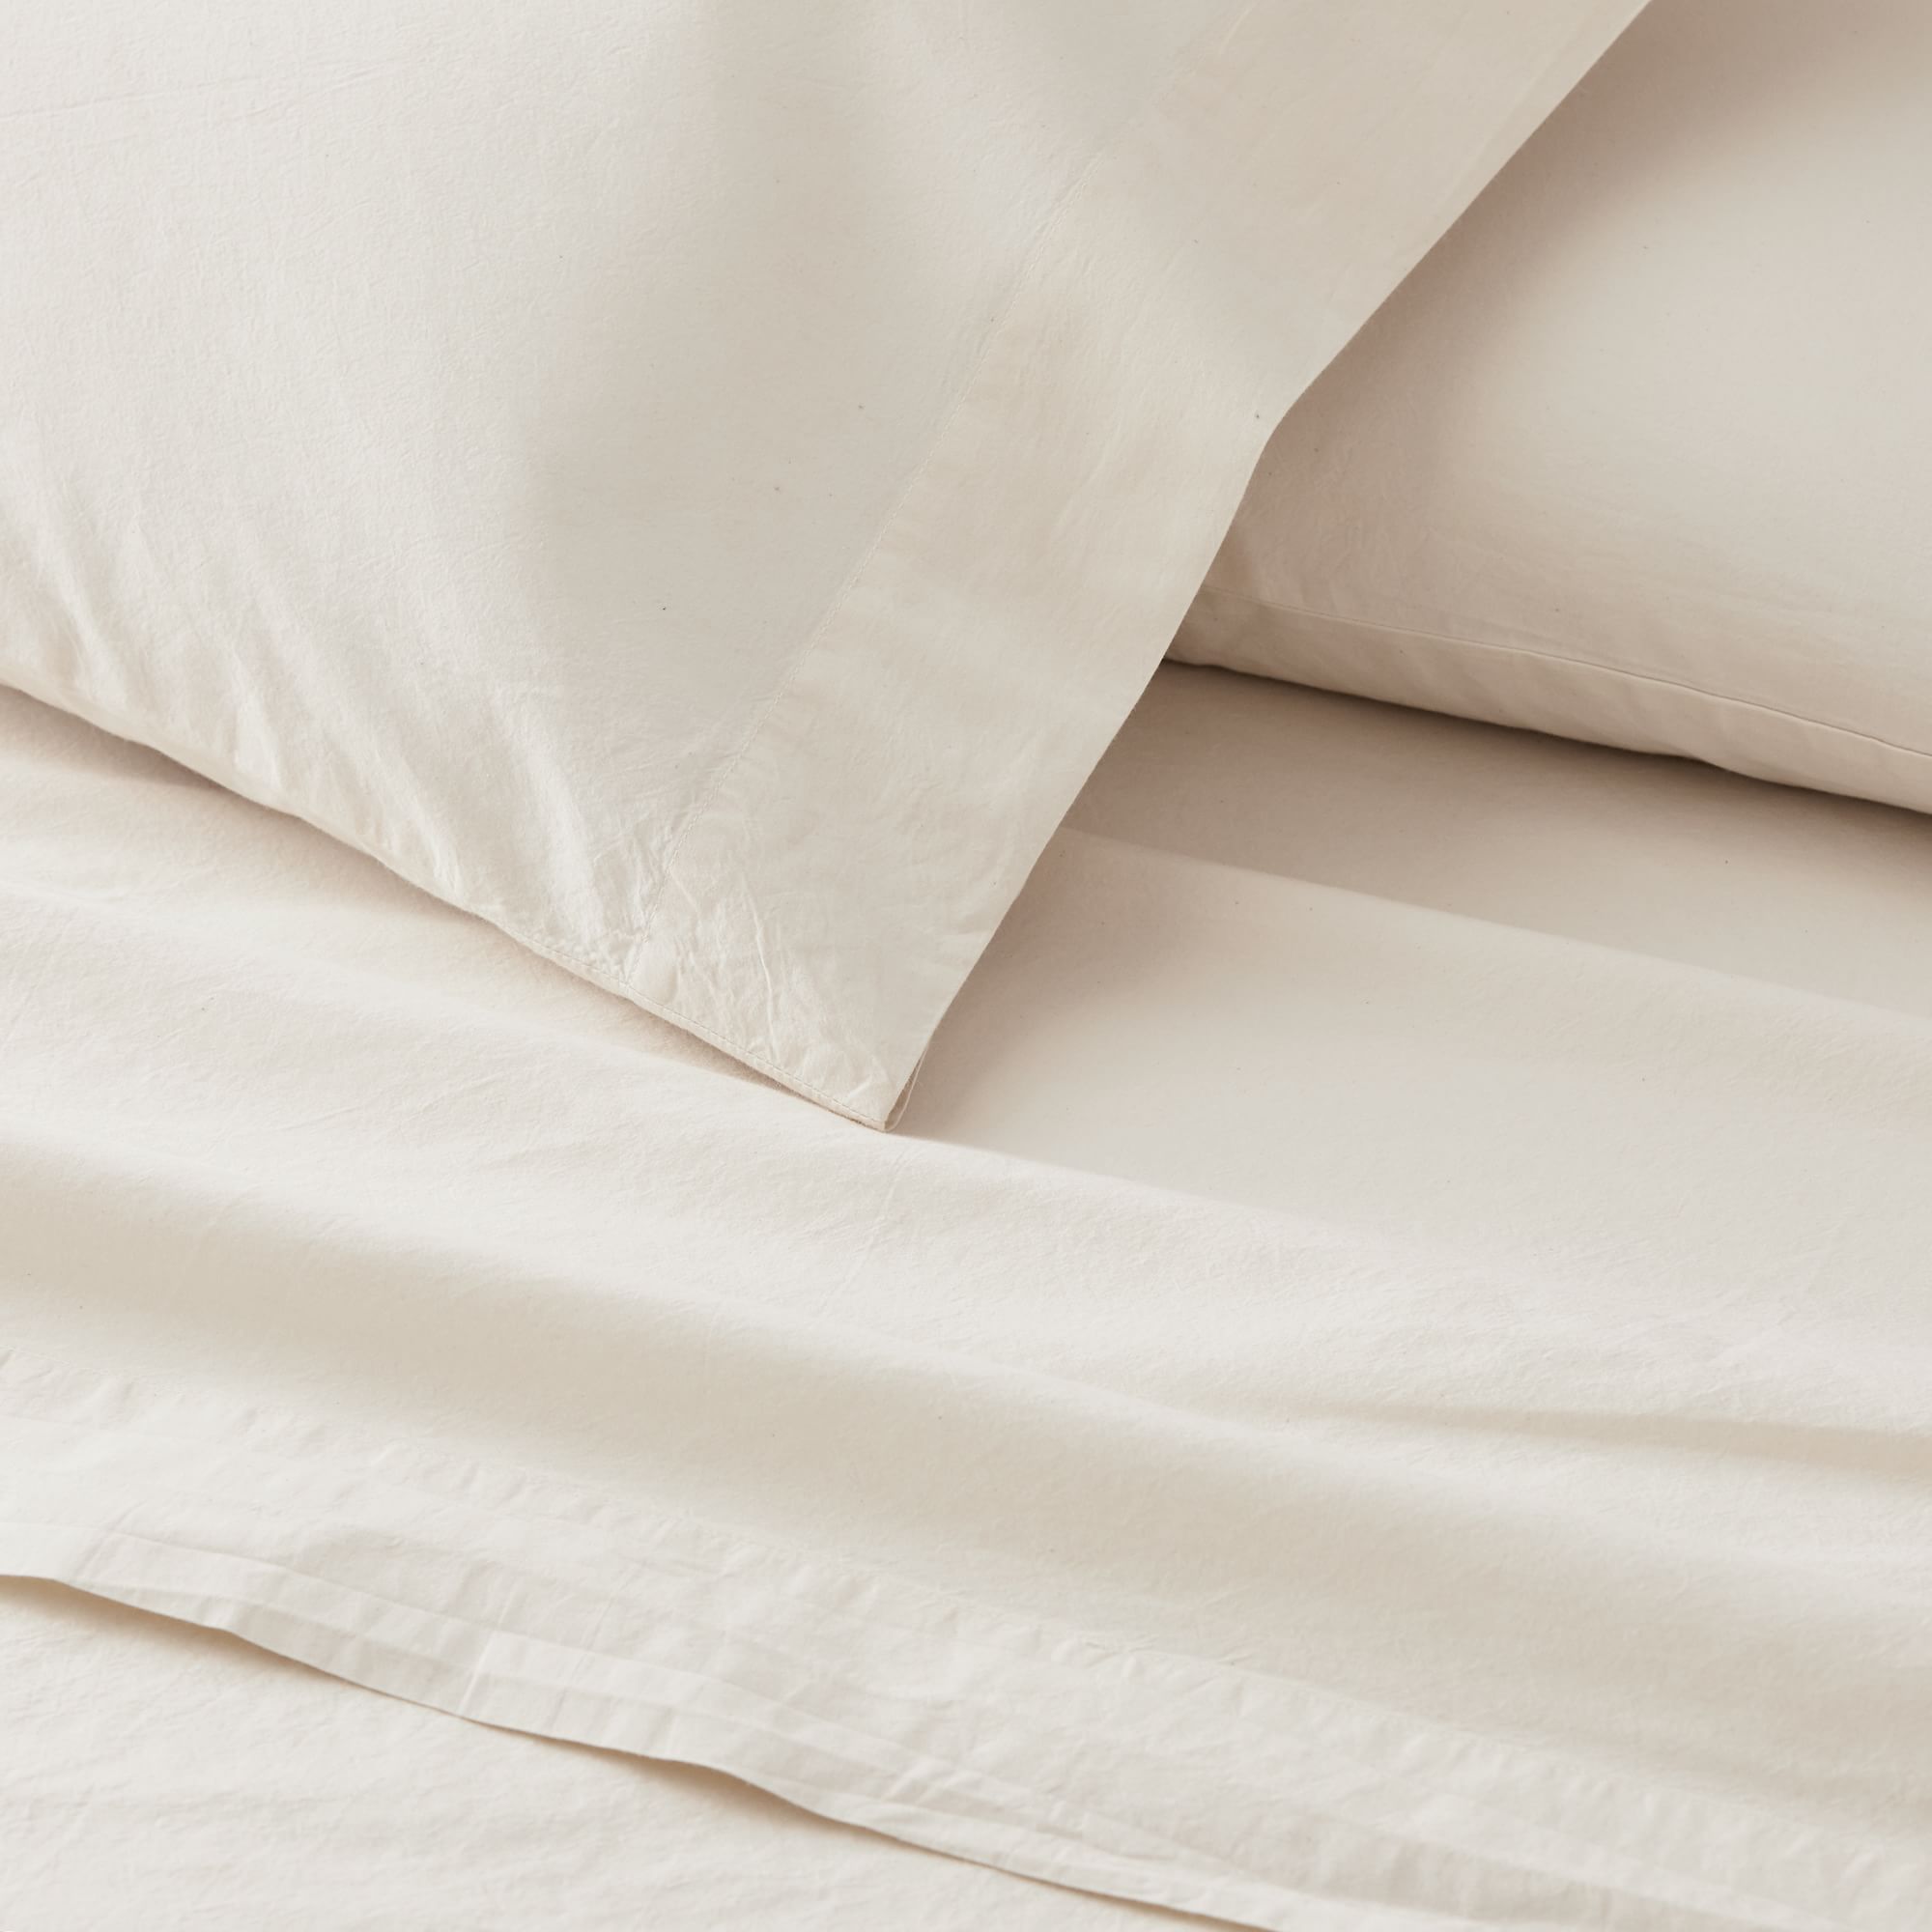 https://assets.weimgs.com/weimgs/ab/images/wcm/products/202303/0055/organic-washed-cotton-percale-sheet-set-xl.jpg